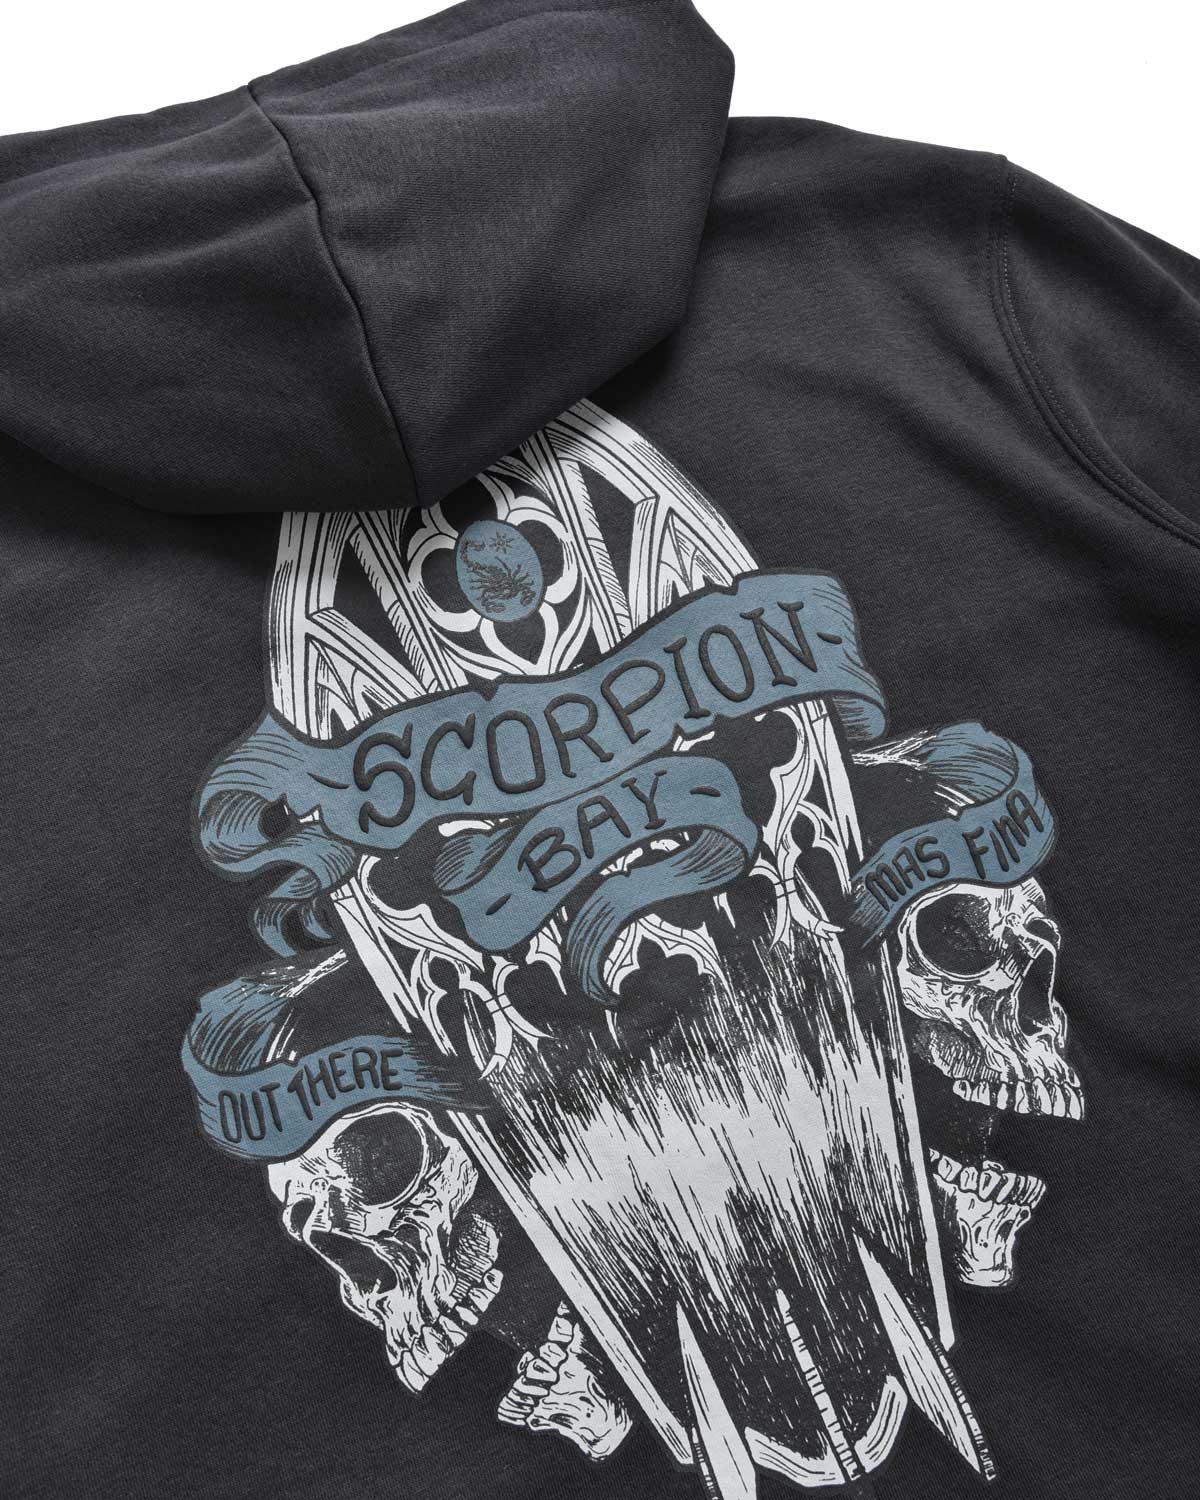 Man | Charcoal-Colored Zip-Up Hoodie With “Spectral Board” Print